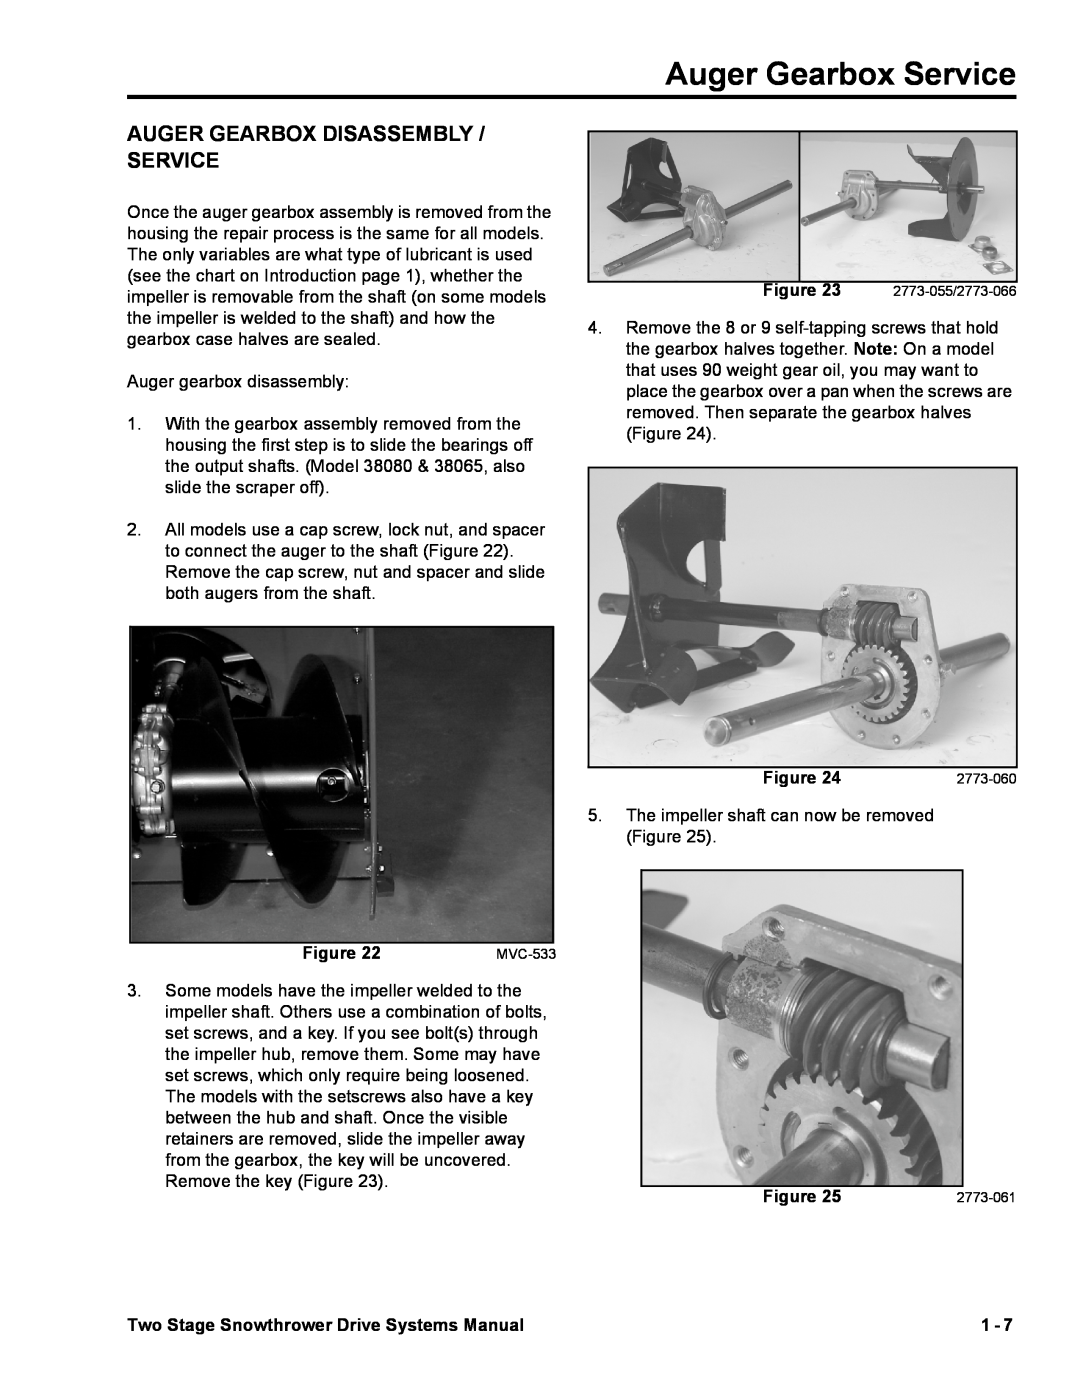 Toro 38065, 38080 Auger Gearbox Disassembly / Service, Auger Gearbox Service, Two Stage Snowthrower Drive Systems Manual 